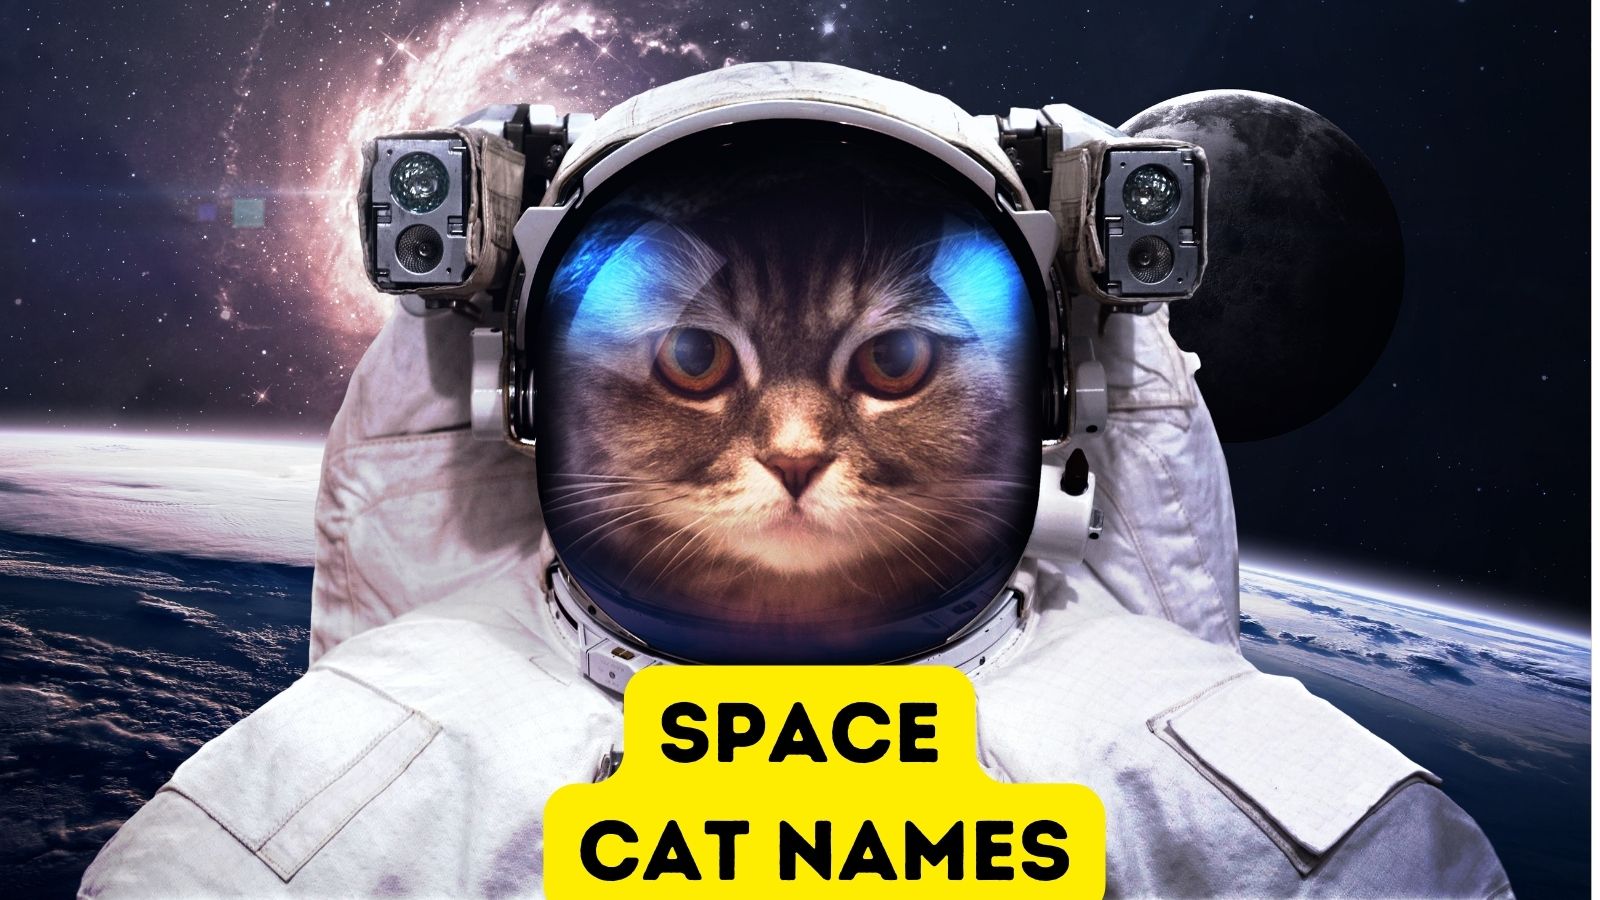 cats in space